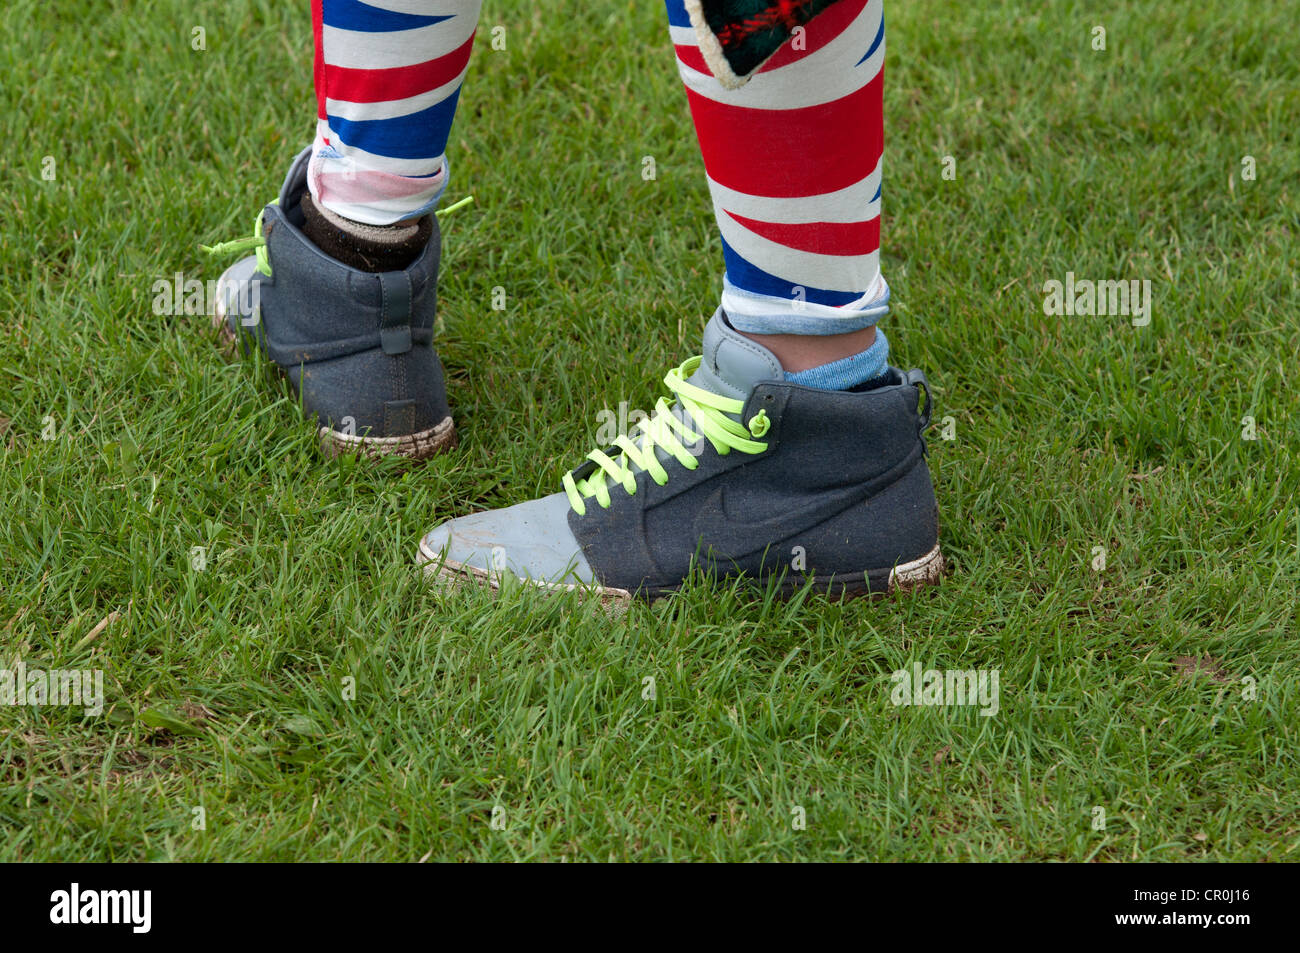 Girl wearing Union Jack trousers and Nike boots Stock Photo - Alamy